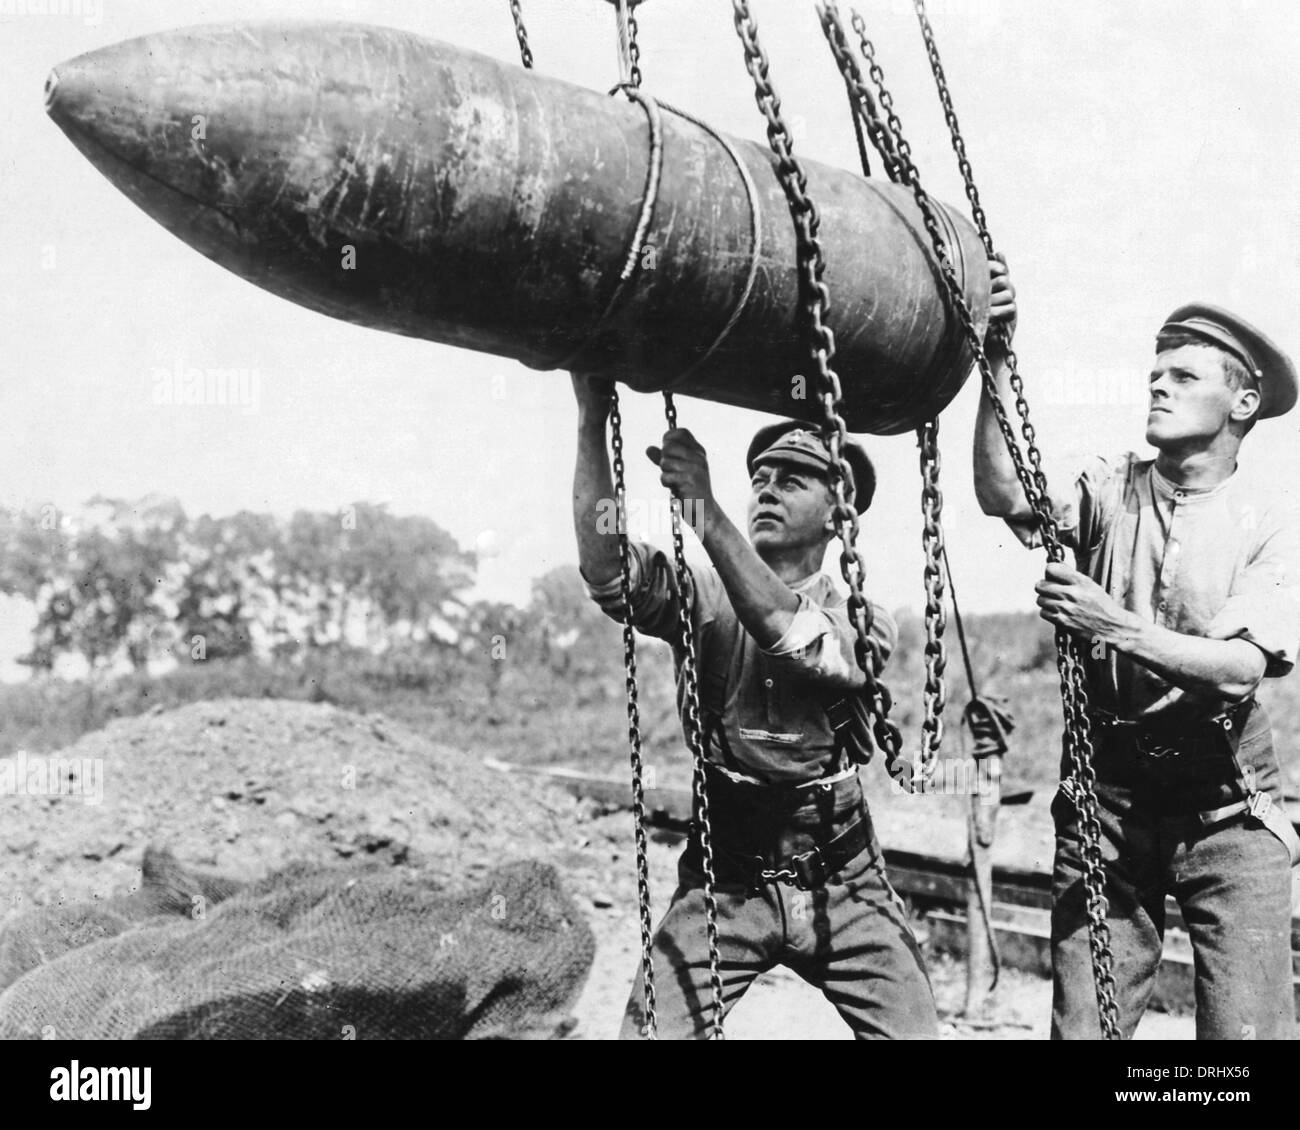 Artillery shell ww1 Black and White Stock Photos & Images - Alamy